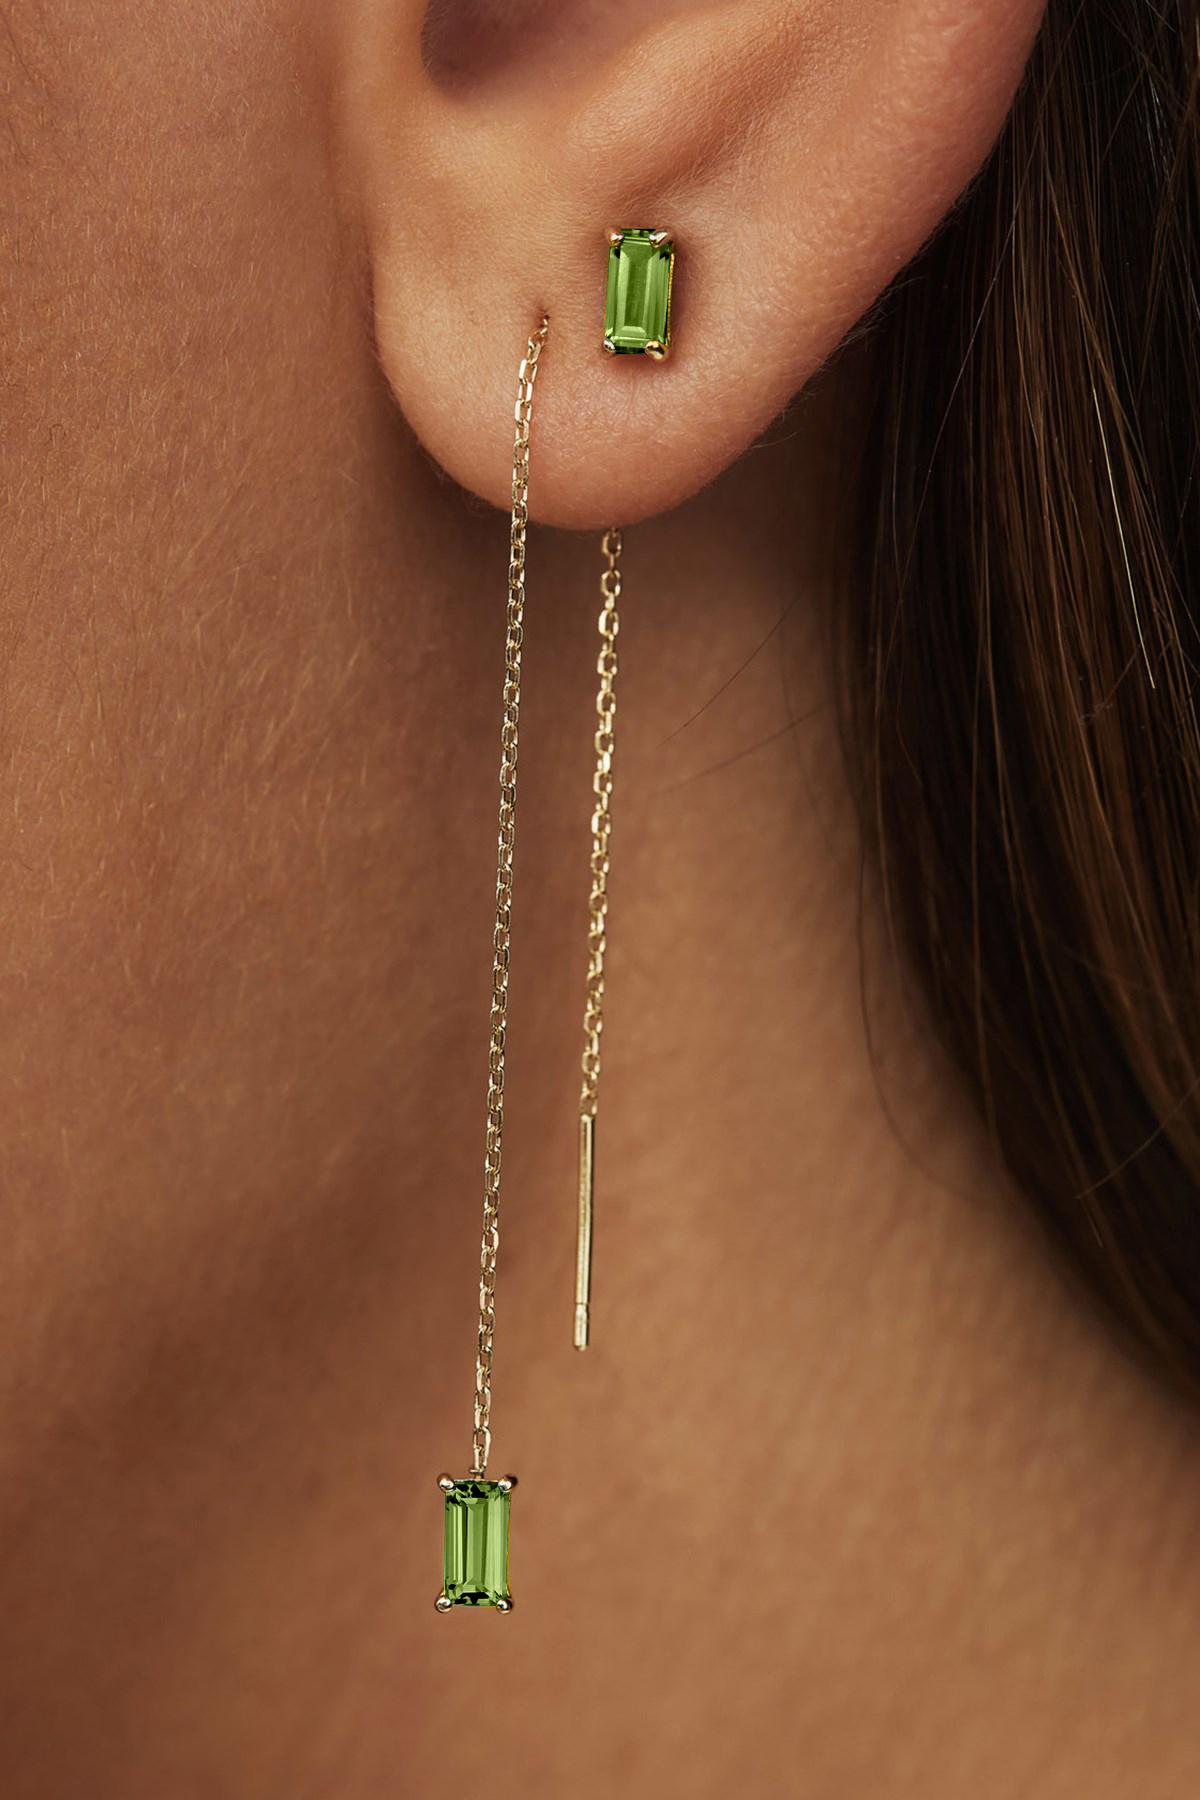 Women's 14k solid gold drop earrings with peridots.  For Sale